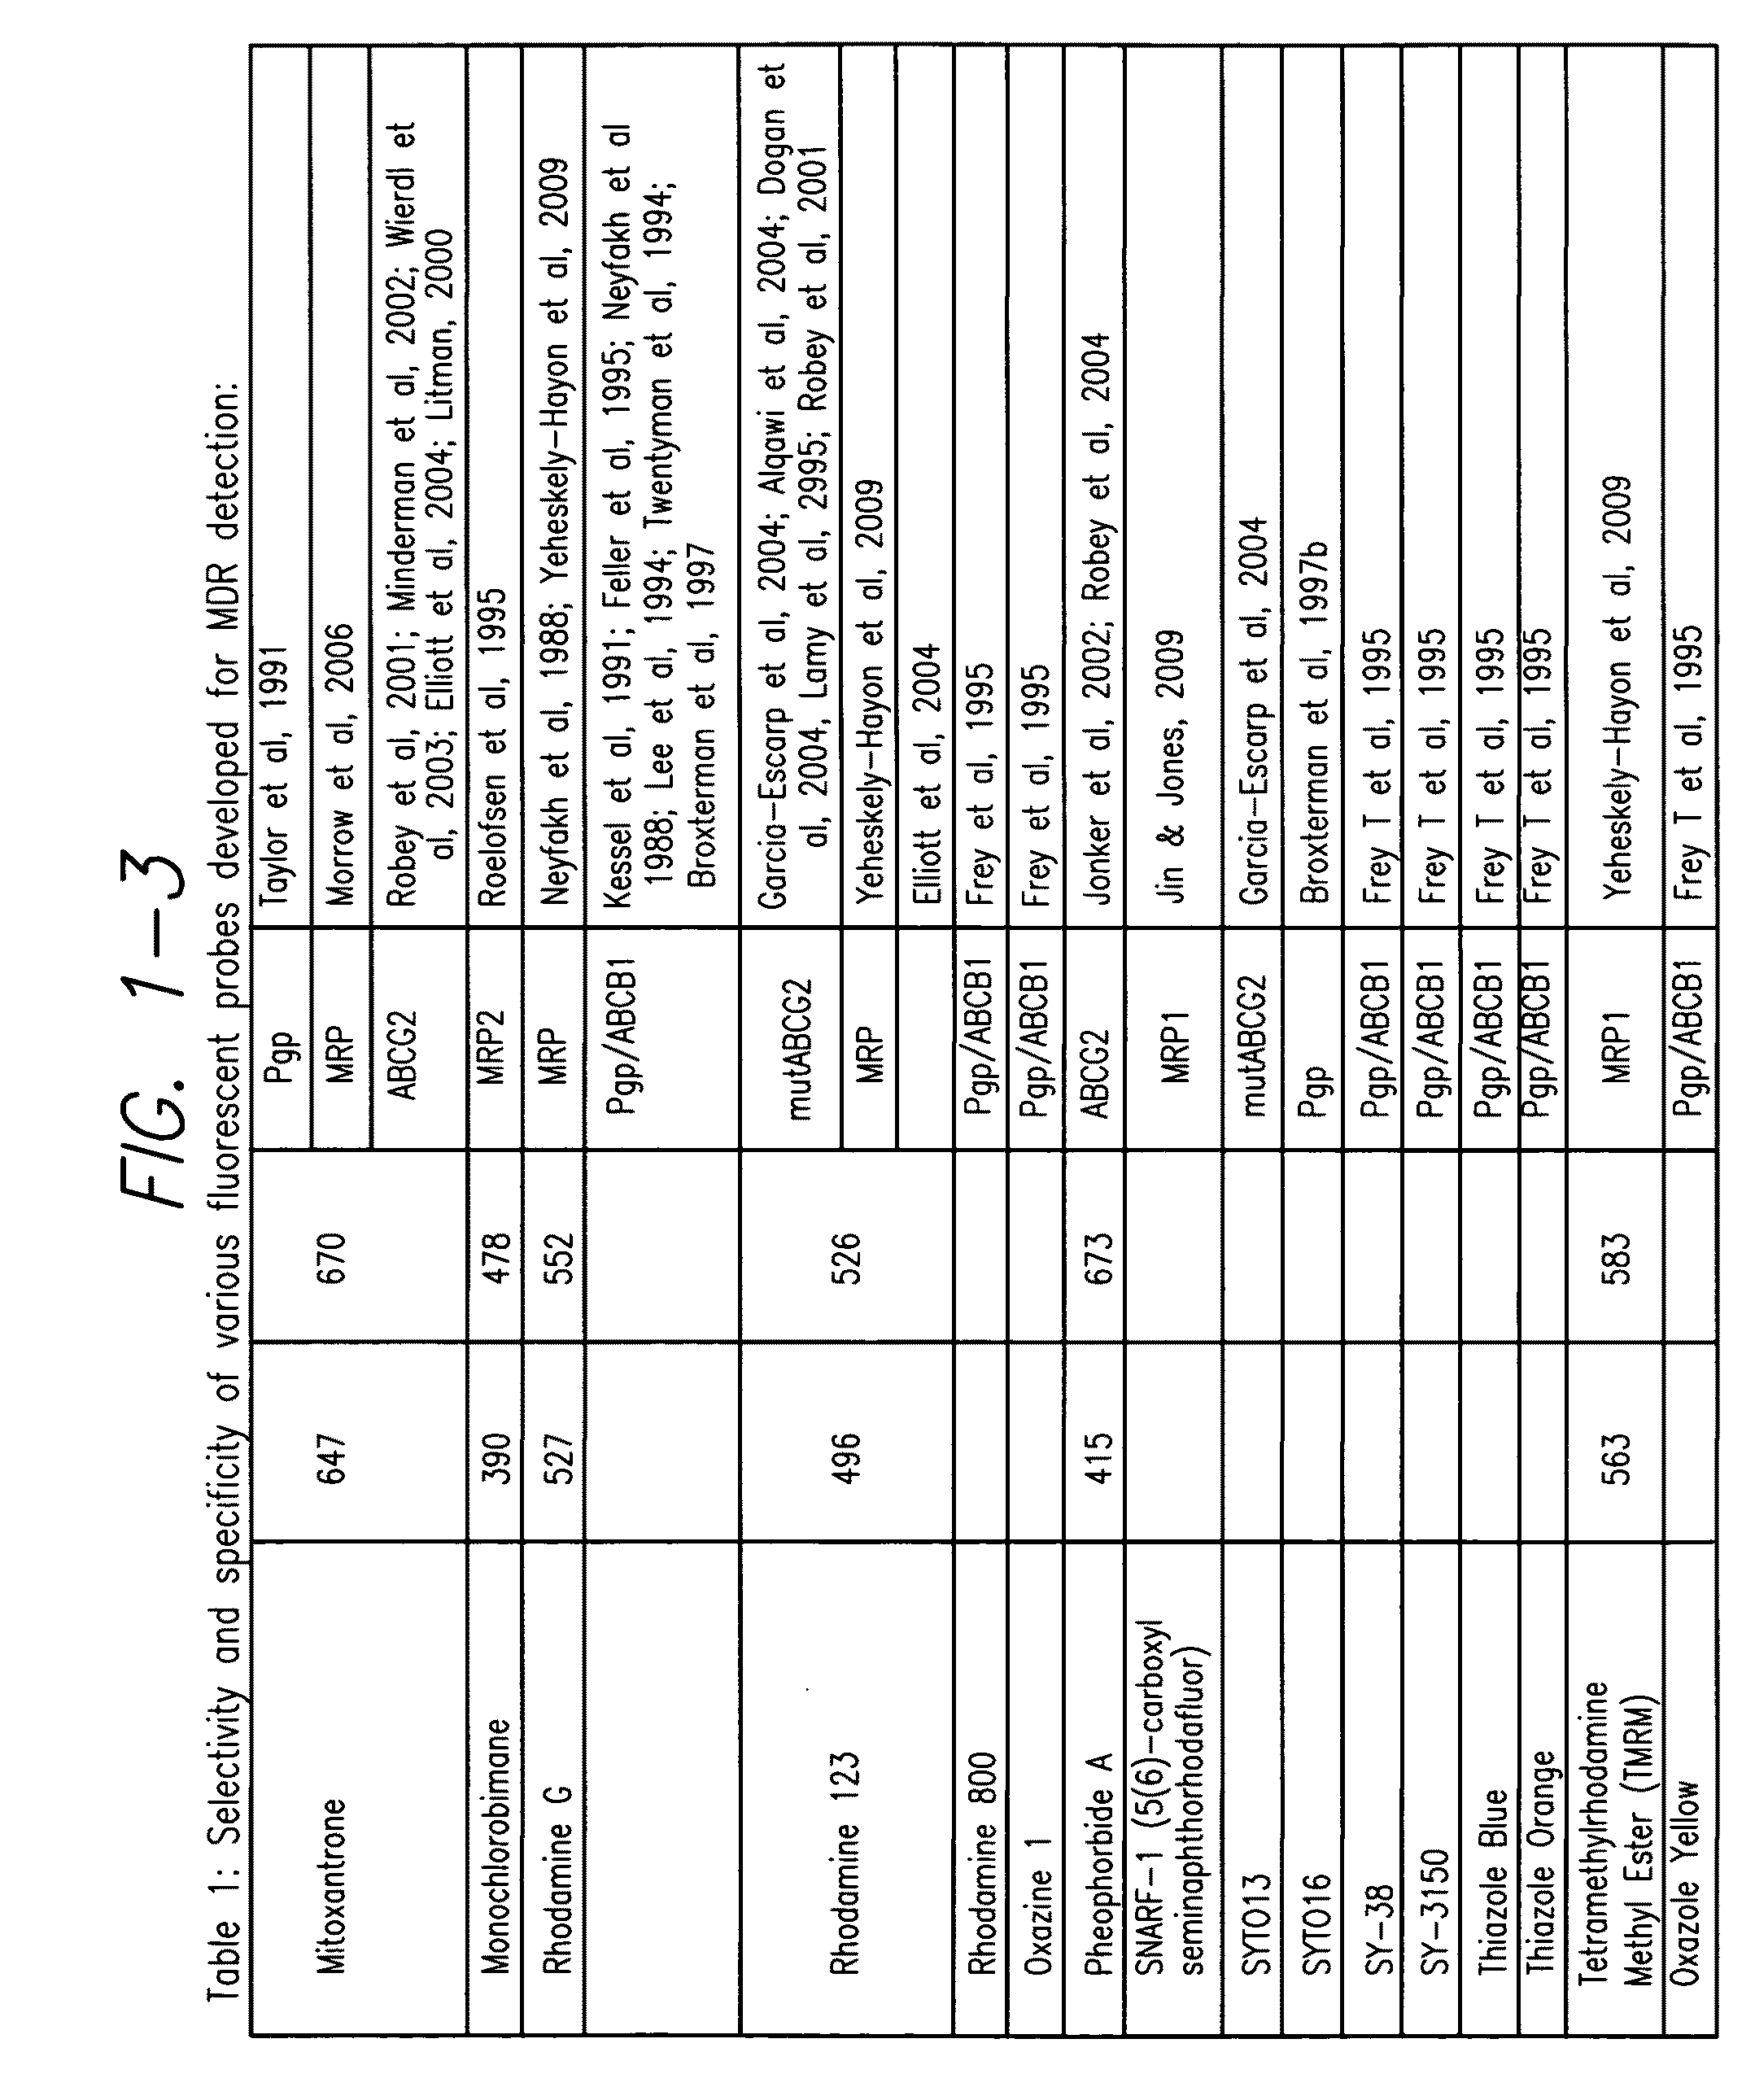 Processes and kits for determining multi-drug resistance of cells